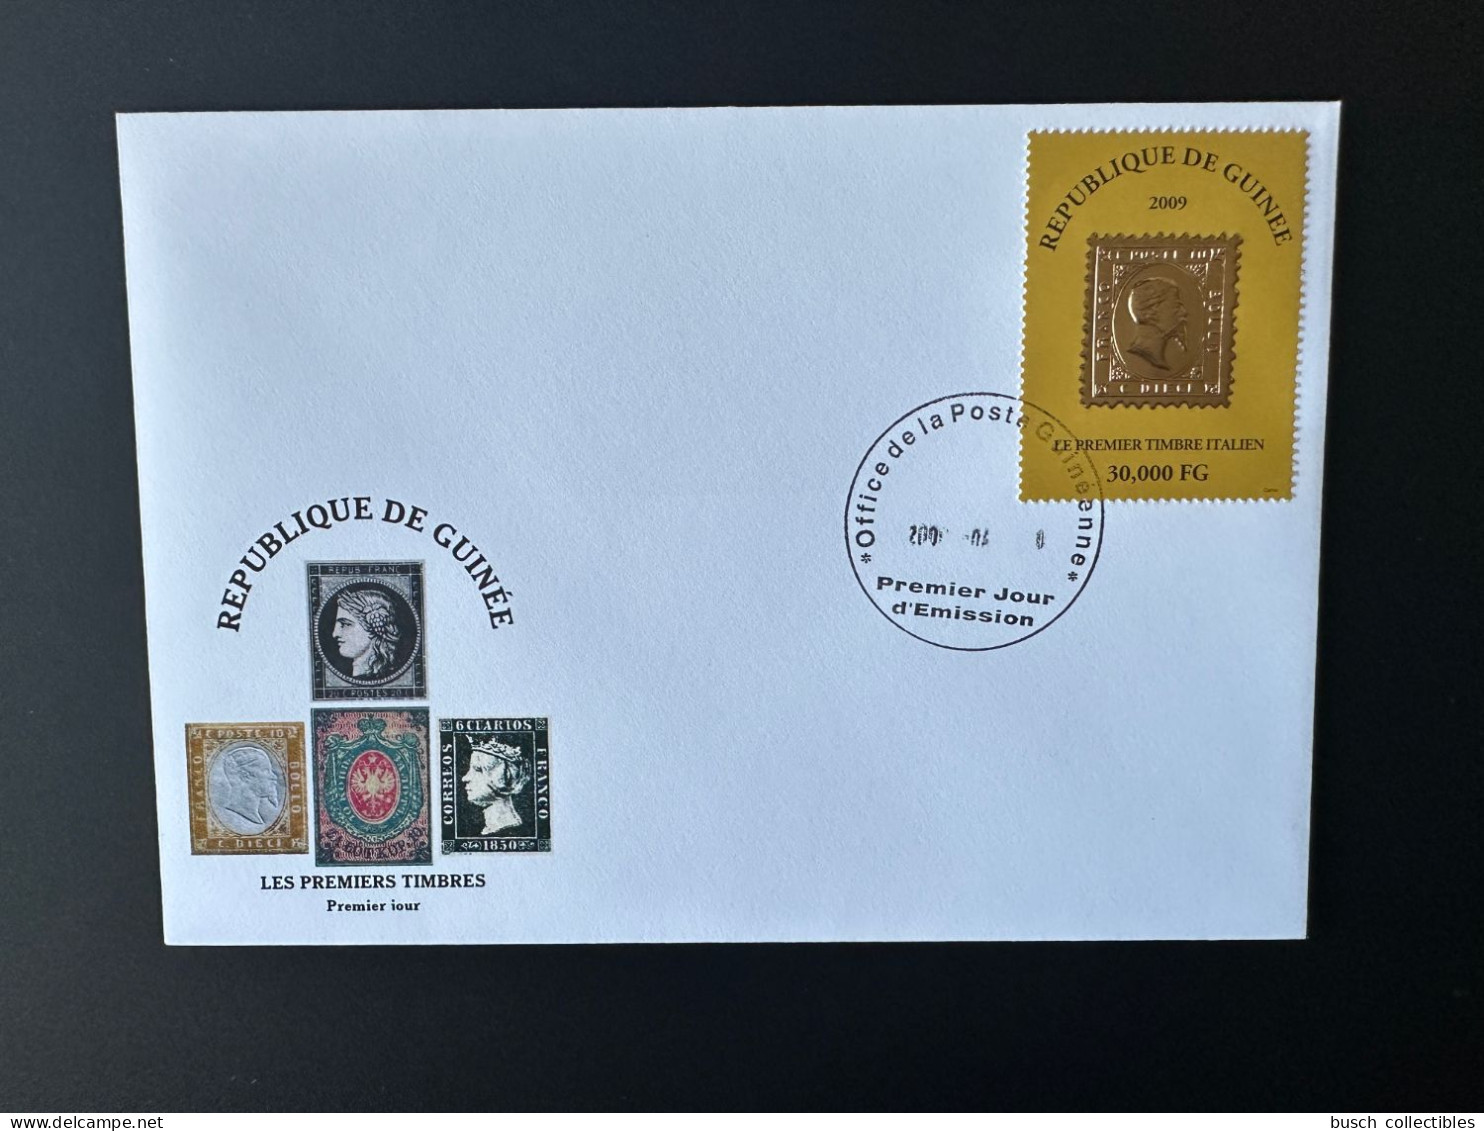 Guinée Guinea 2009 Mi. 6488 FDC Premier Timbre Italien First Italian Stamp On Stamp Gold Or Primo Francobollo Italiano - Neufs